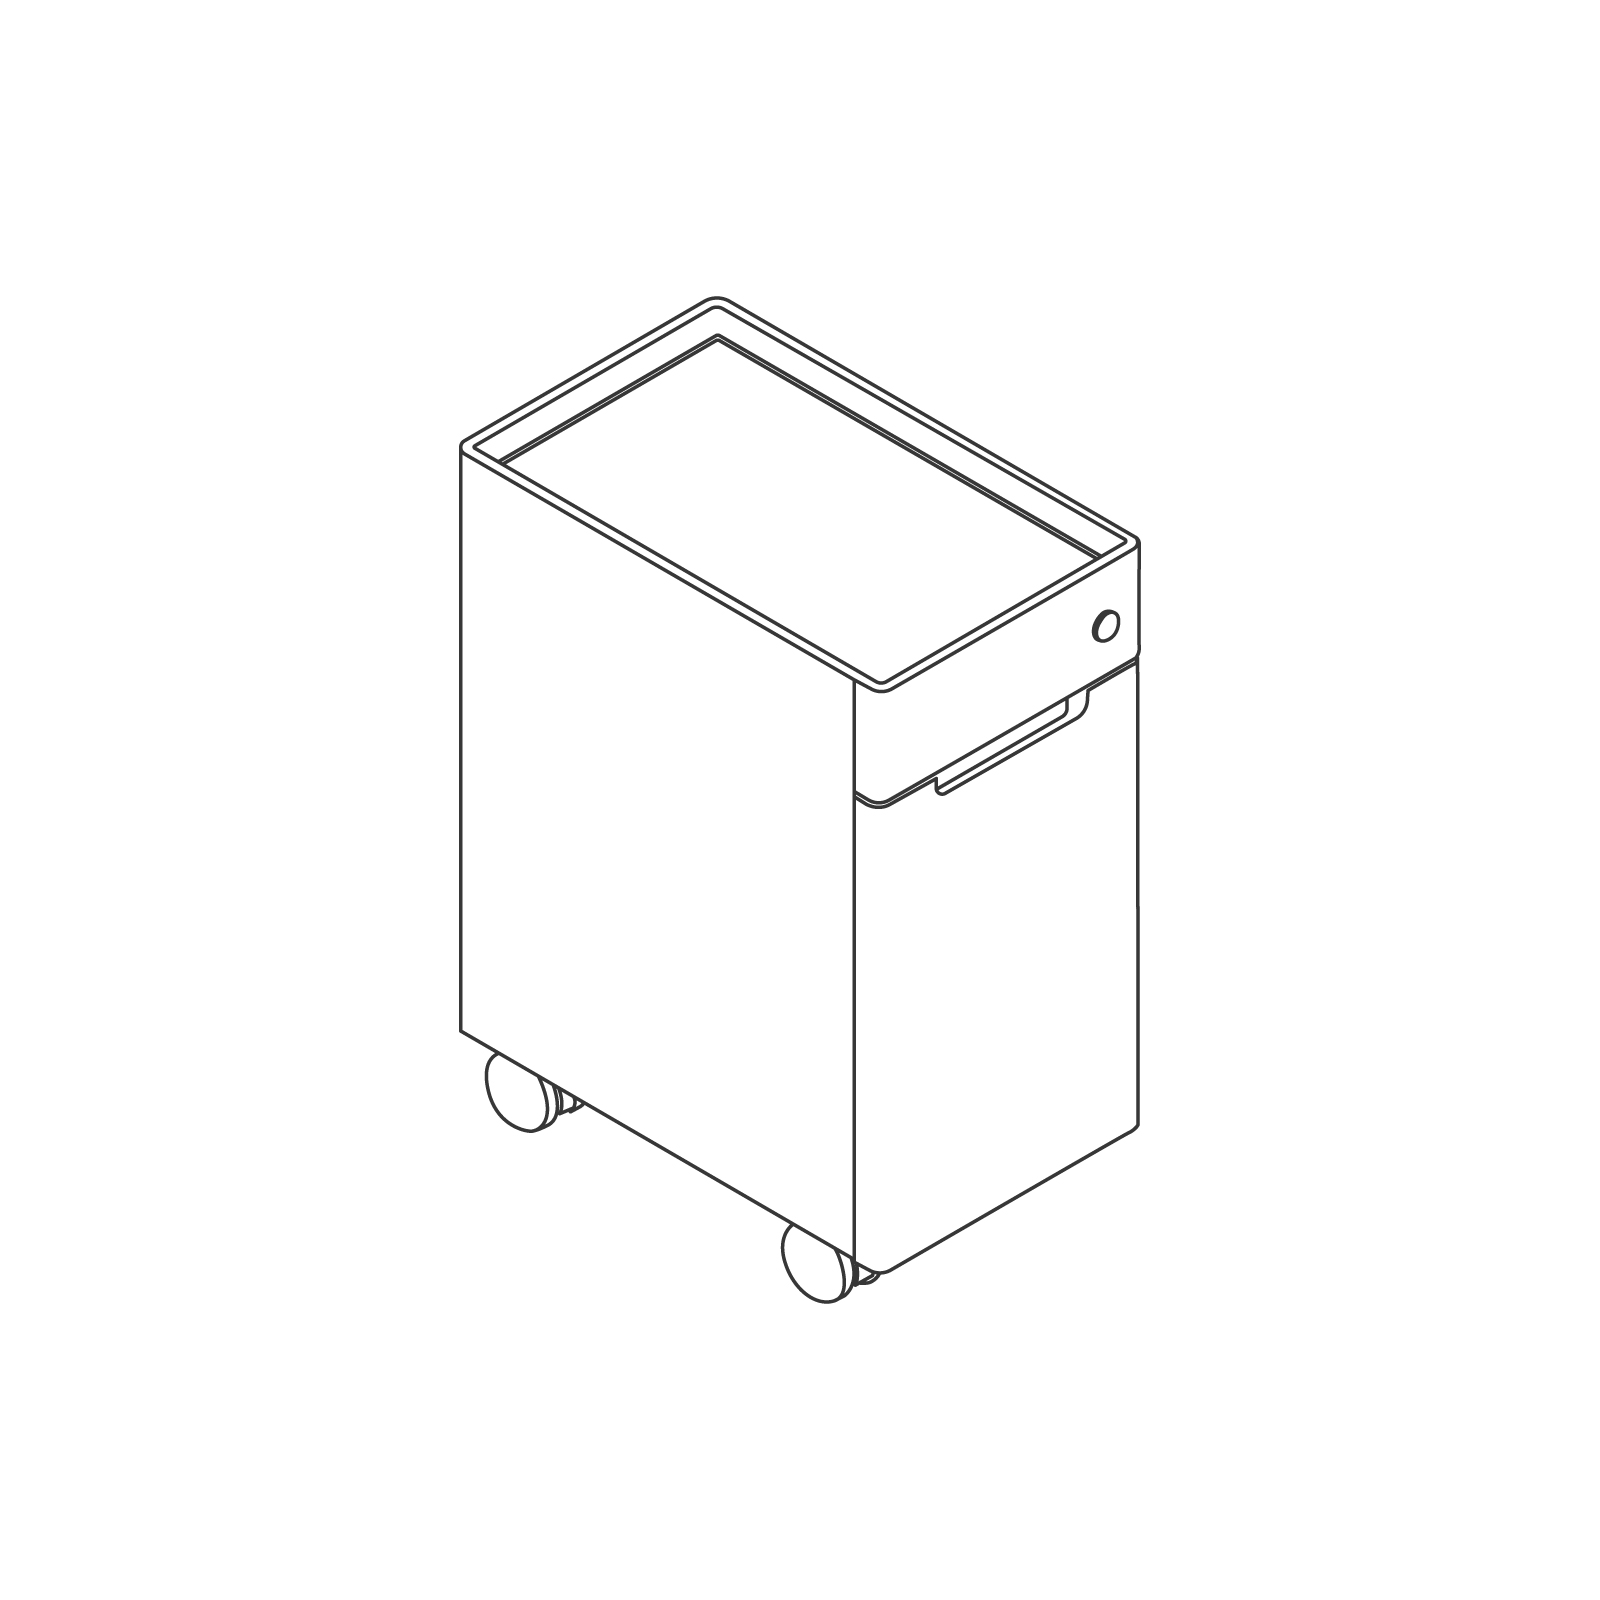 A line drawing - Ambit Pedestal–Closed